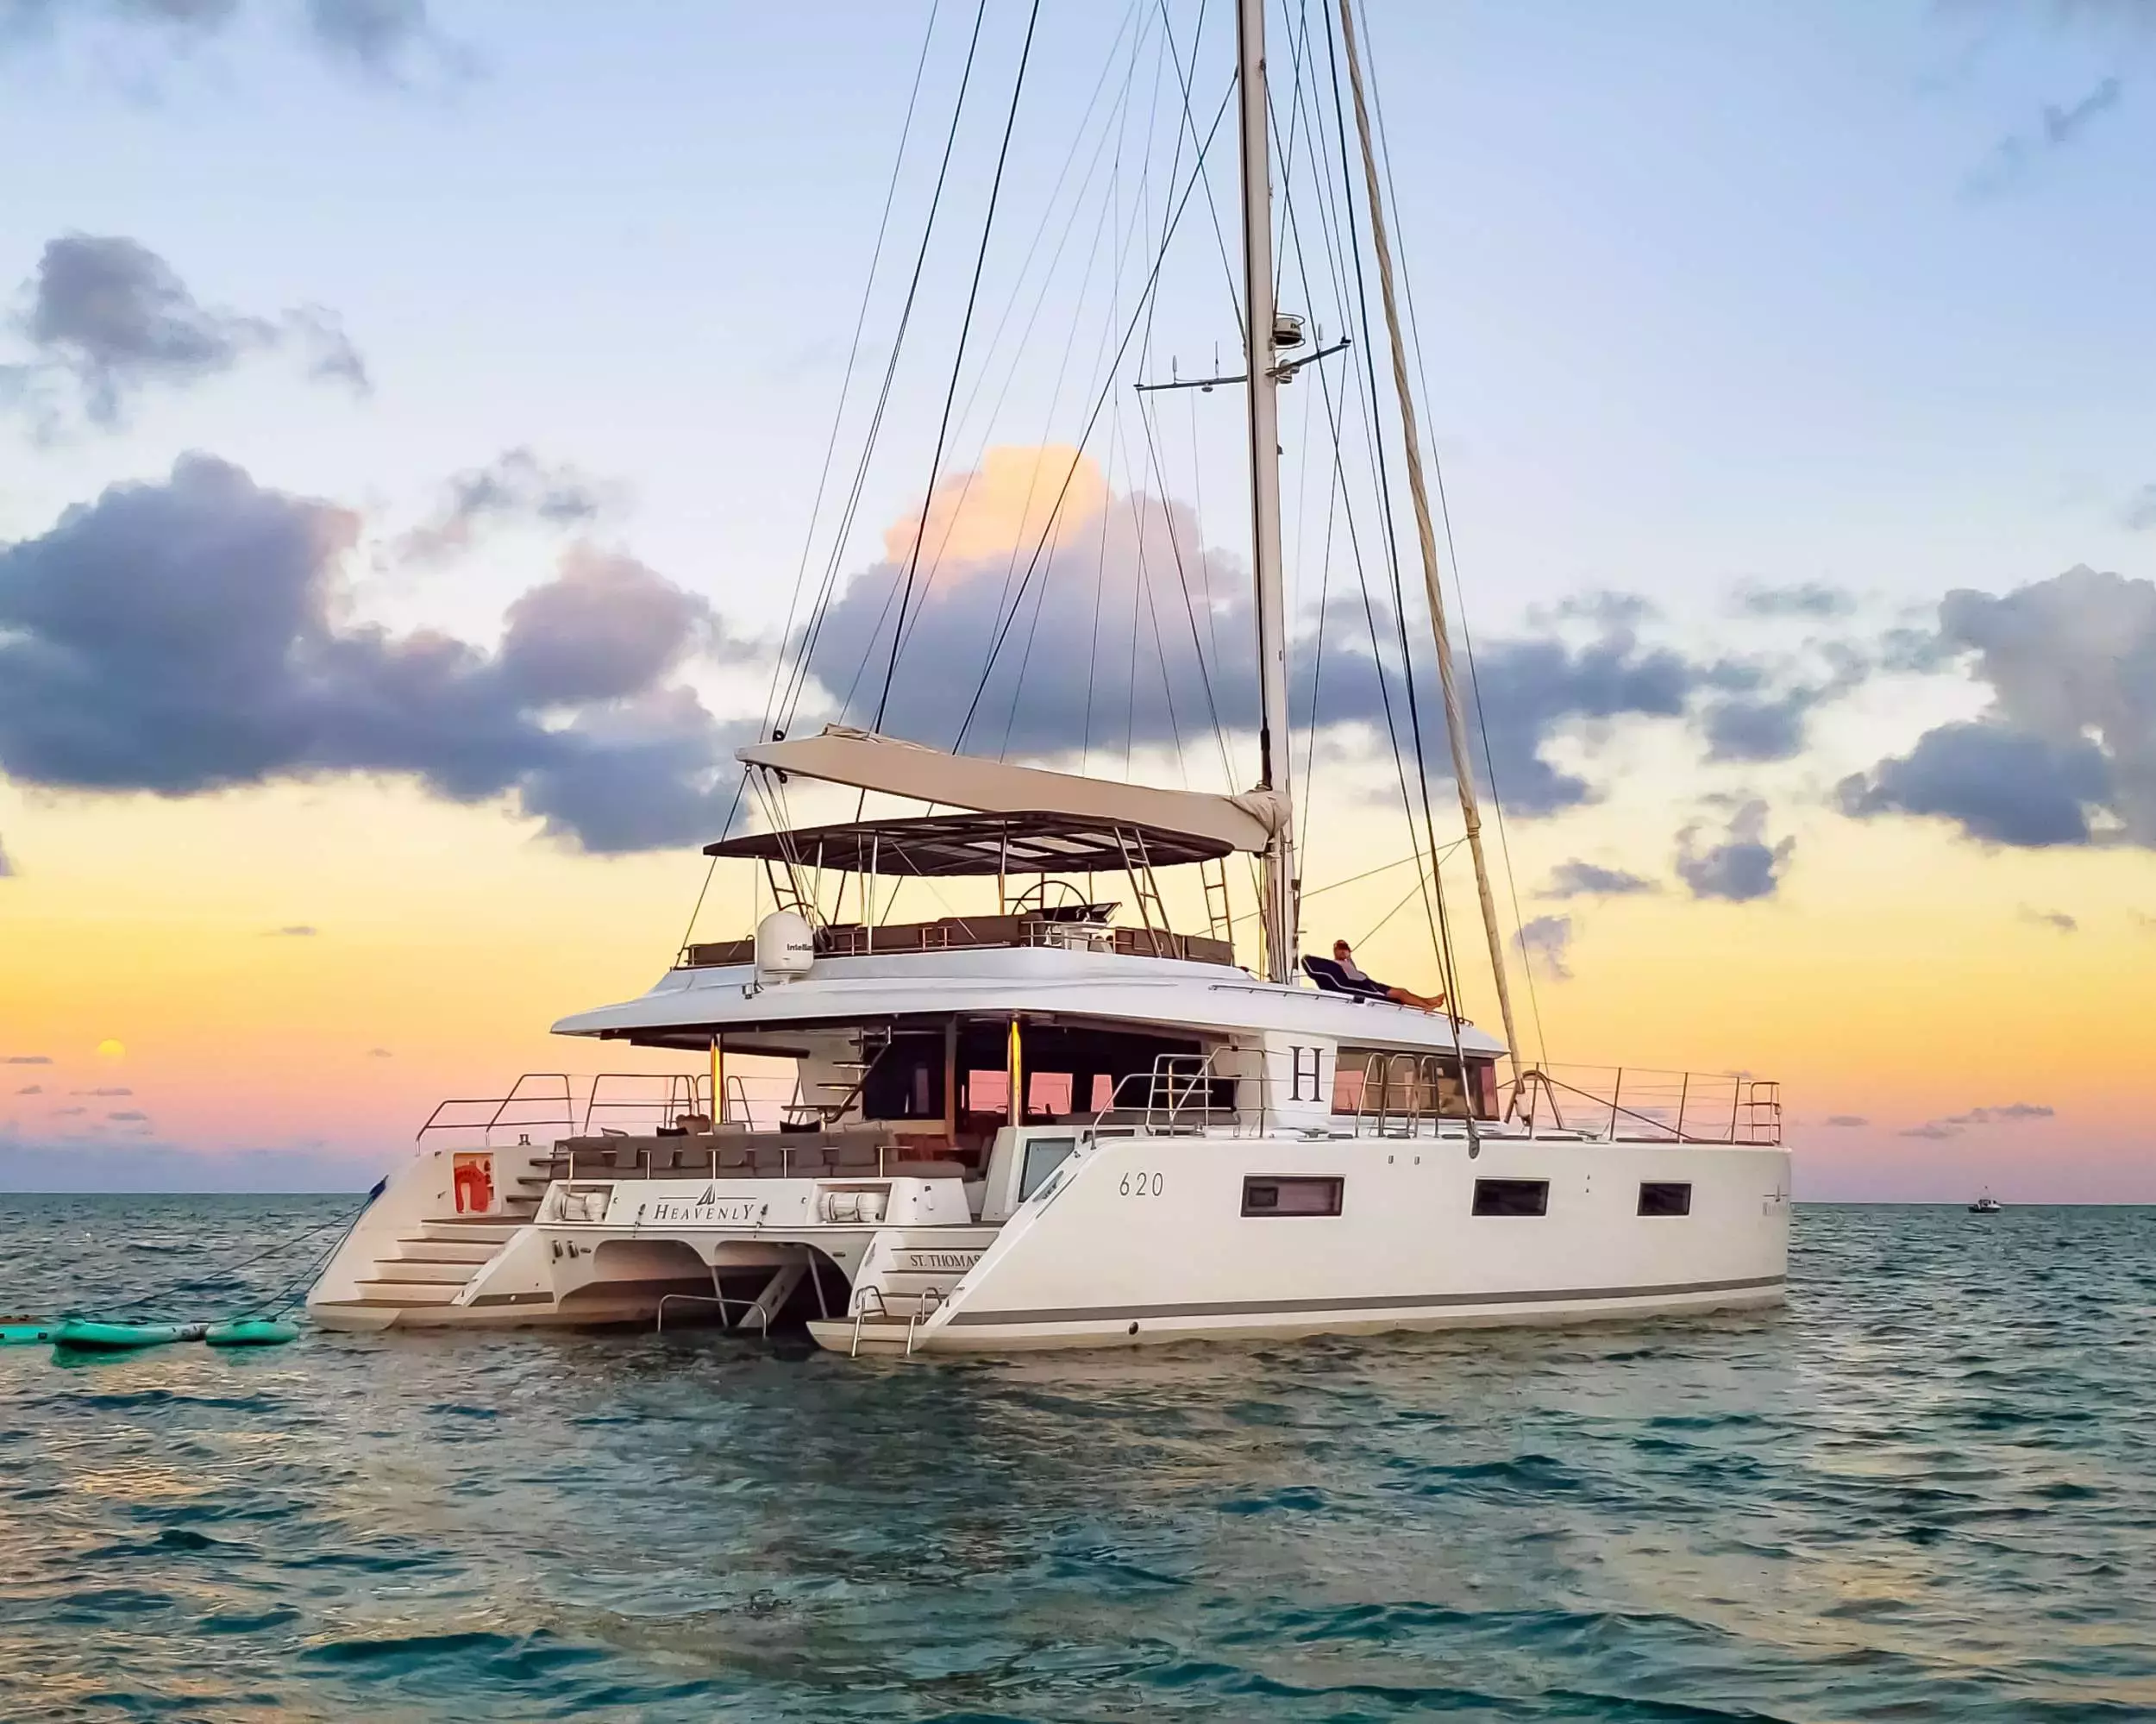 Heavenly by Lagoon - Special Offer for a private Sailing Catamaran Rental in St Thomas with a crew